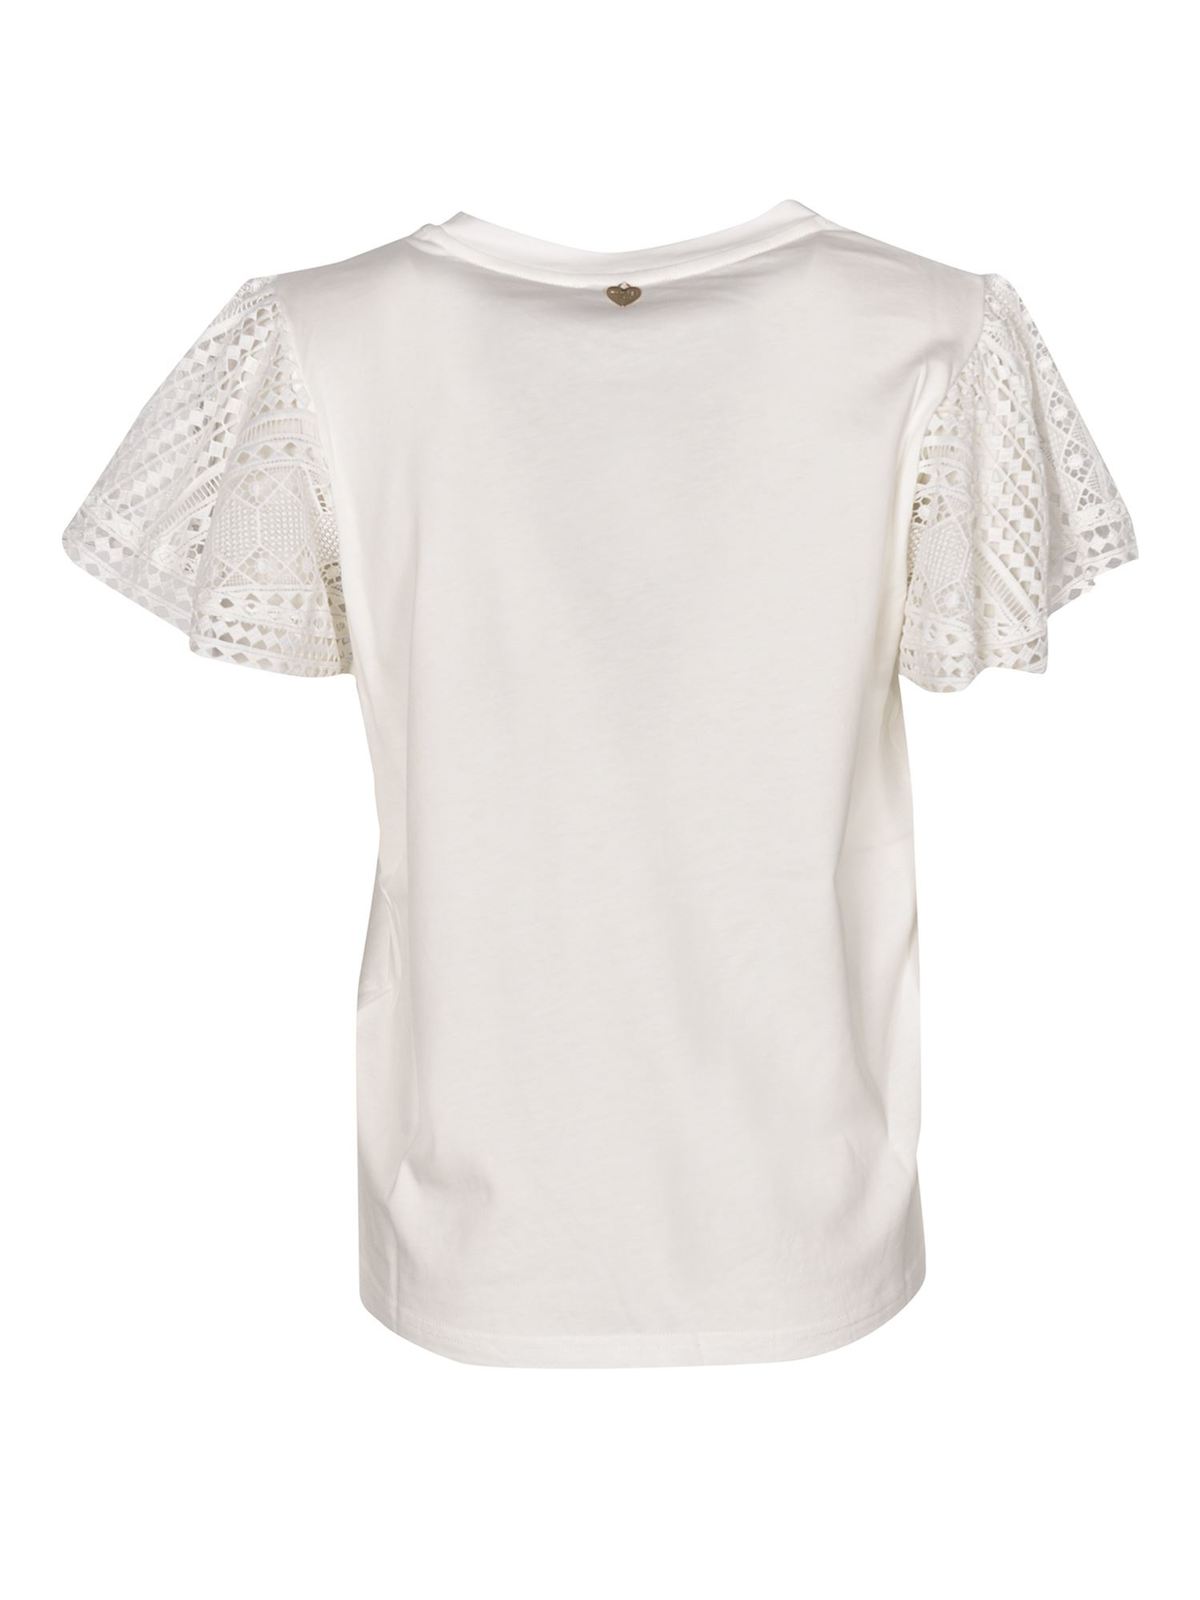 T-shirts Twinset - Lace sleeves t-shirt in white - 211TT222A00001